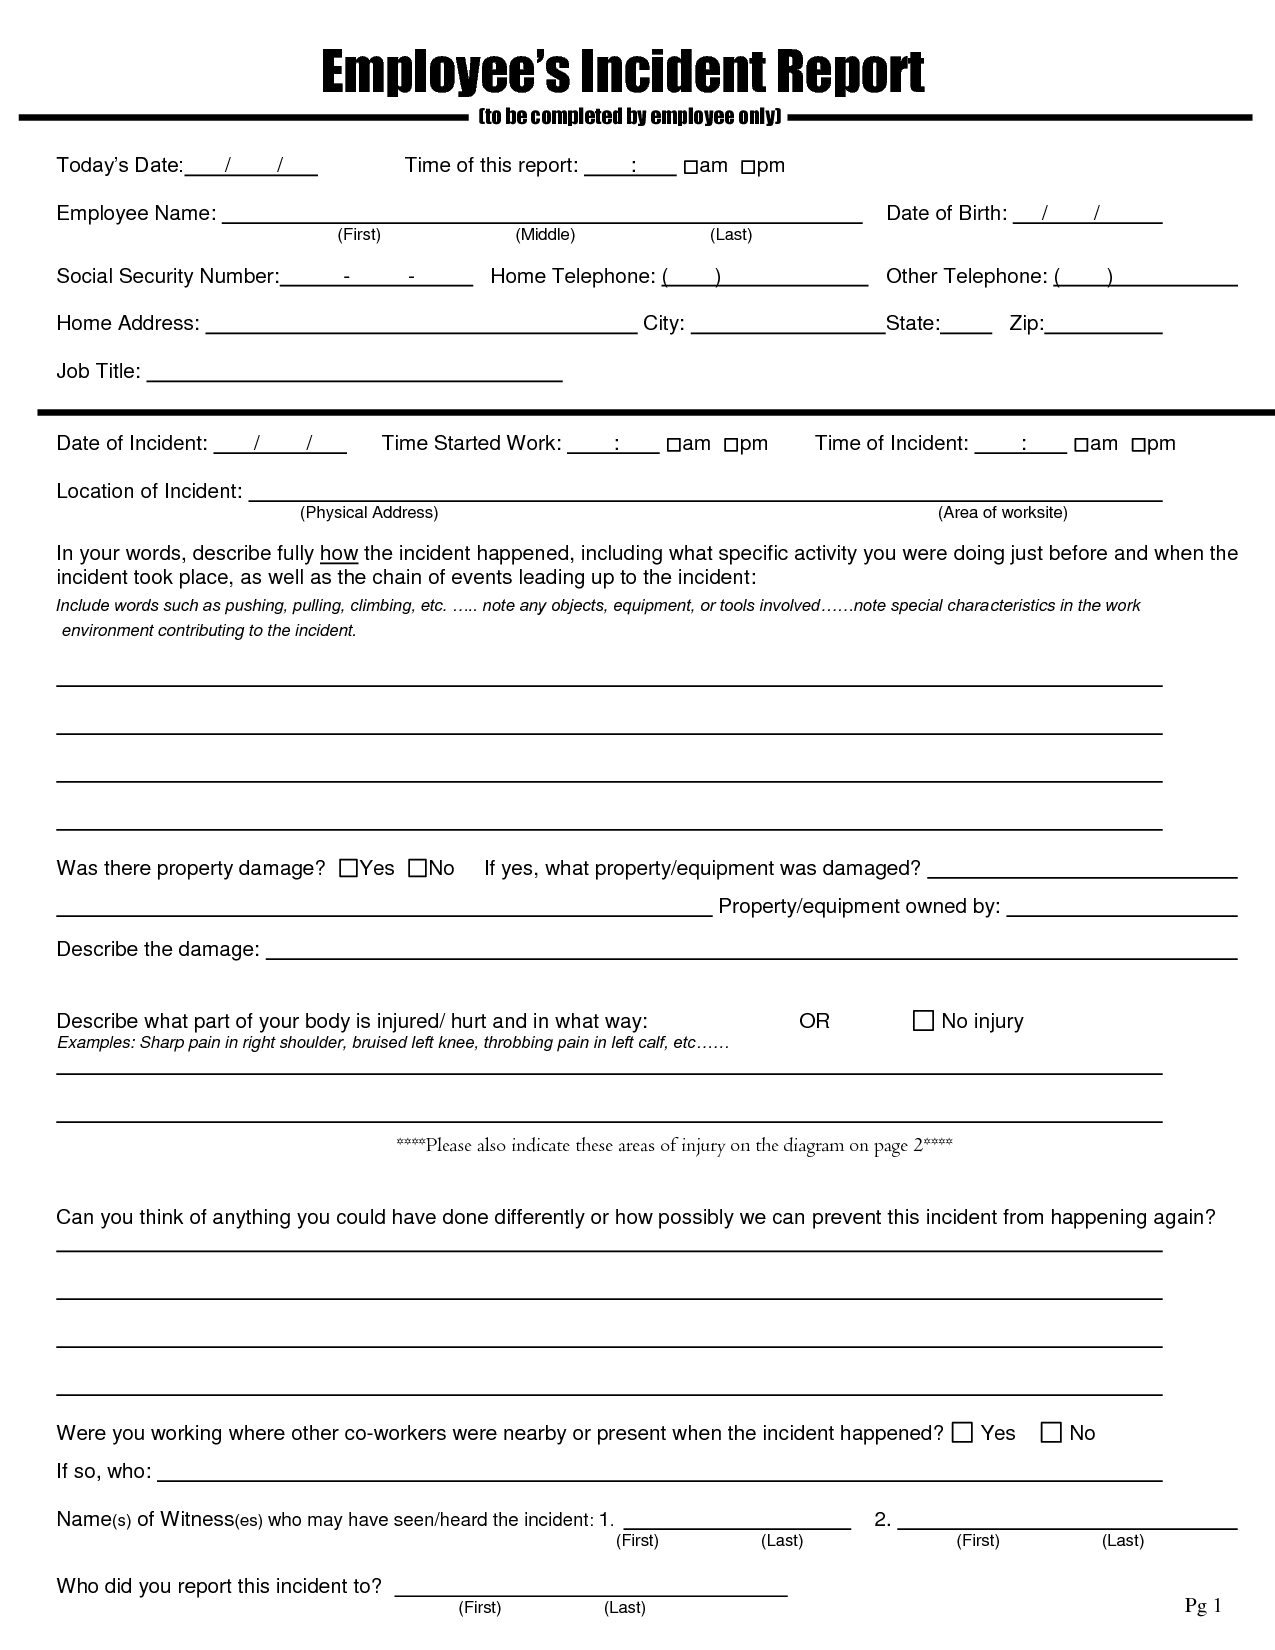 employee injury report form template free blank employee incident 